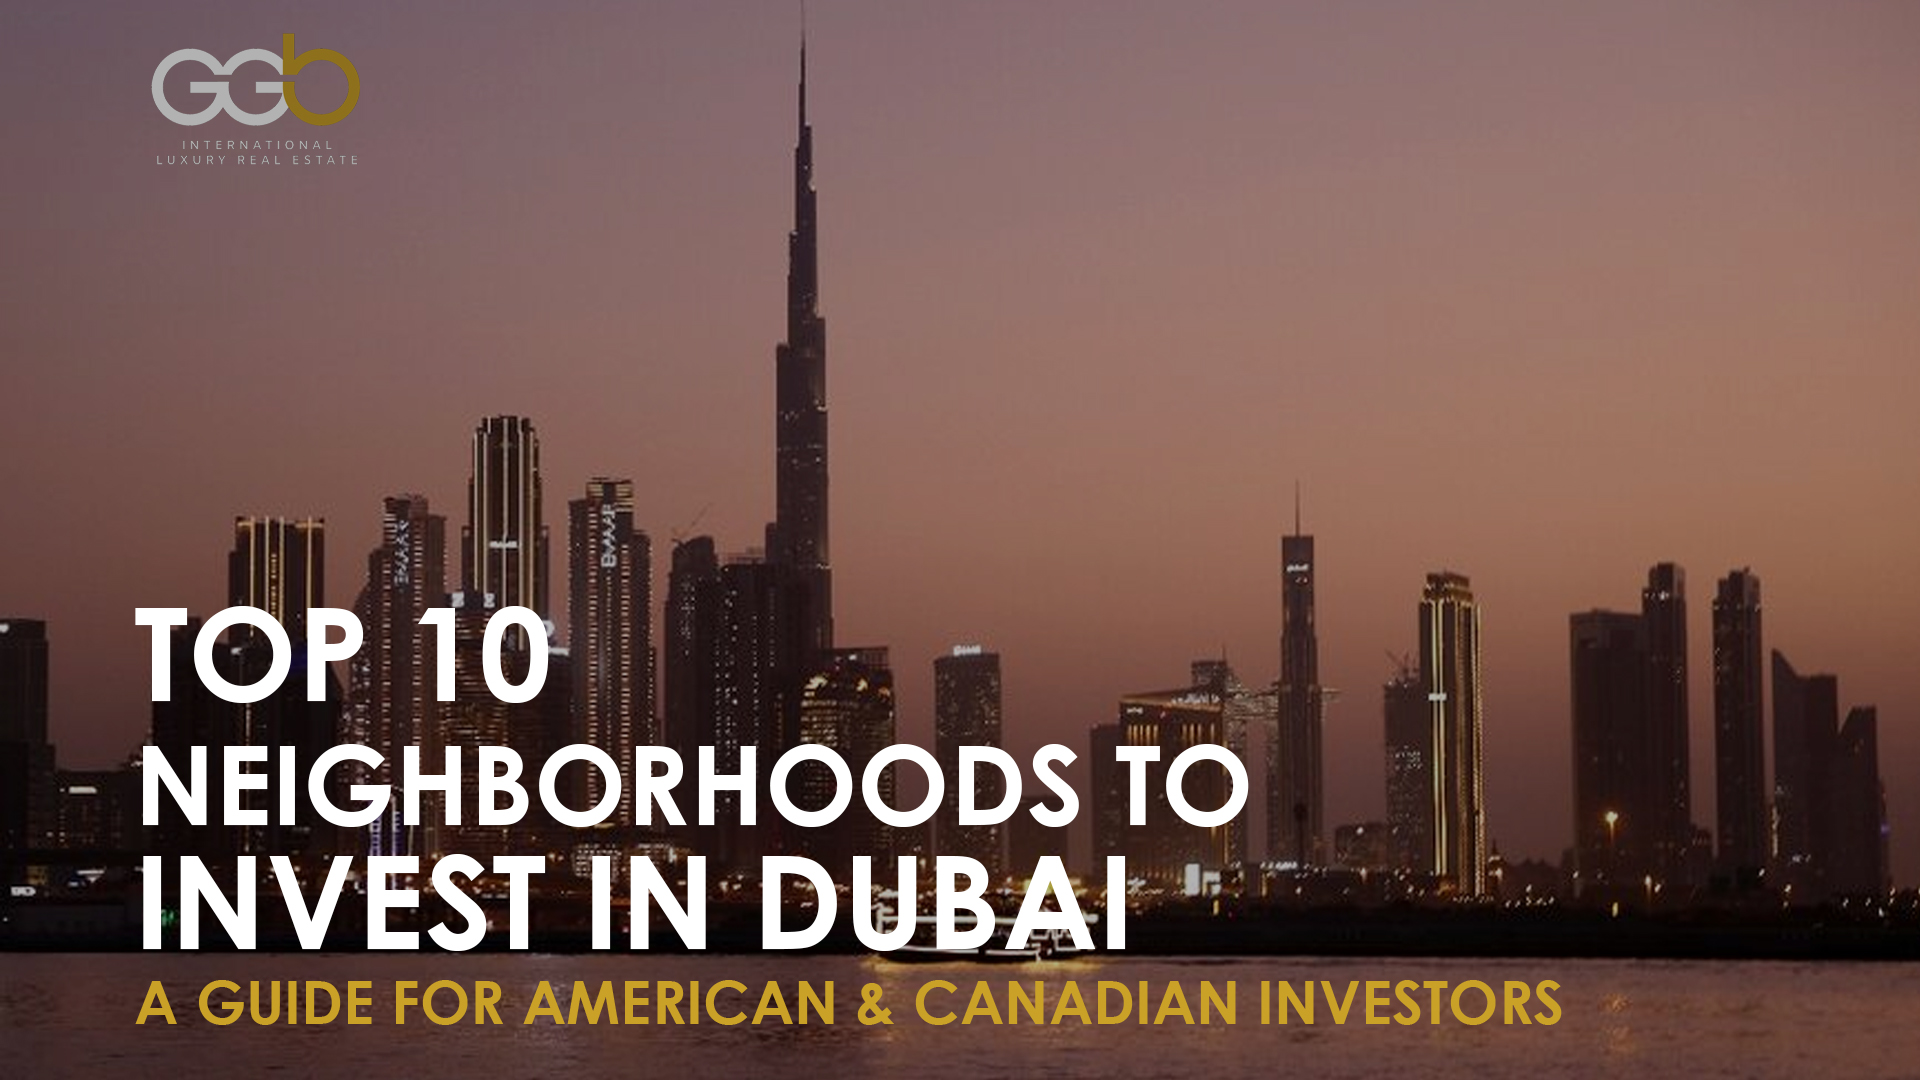 Top 10 Neighborhoods to Invest in Dubai: A Guide for American and Canadian Investors